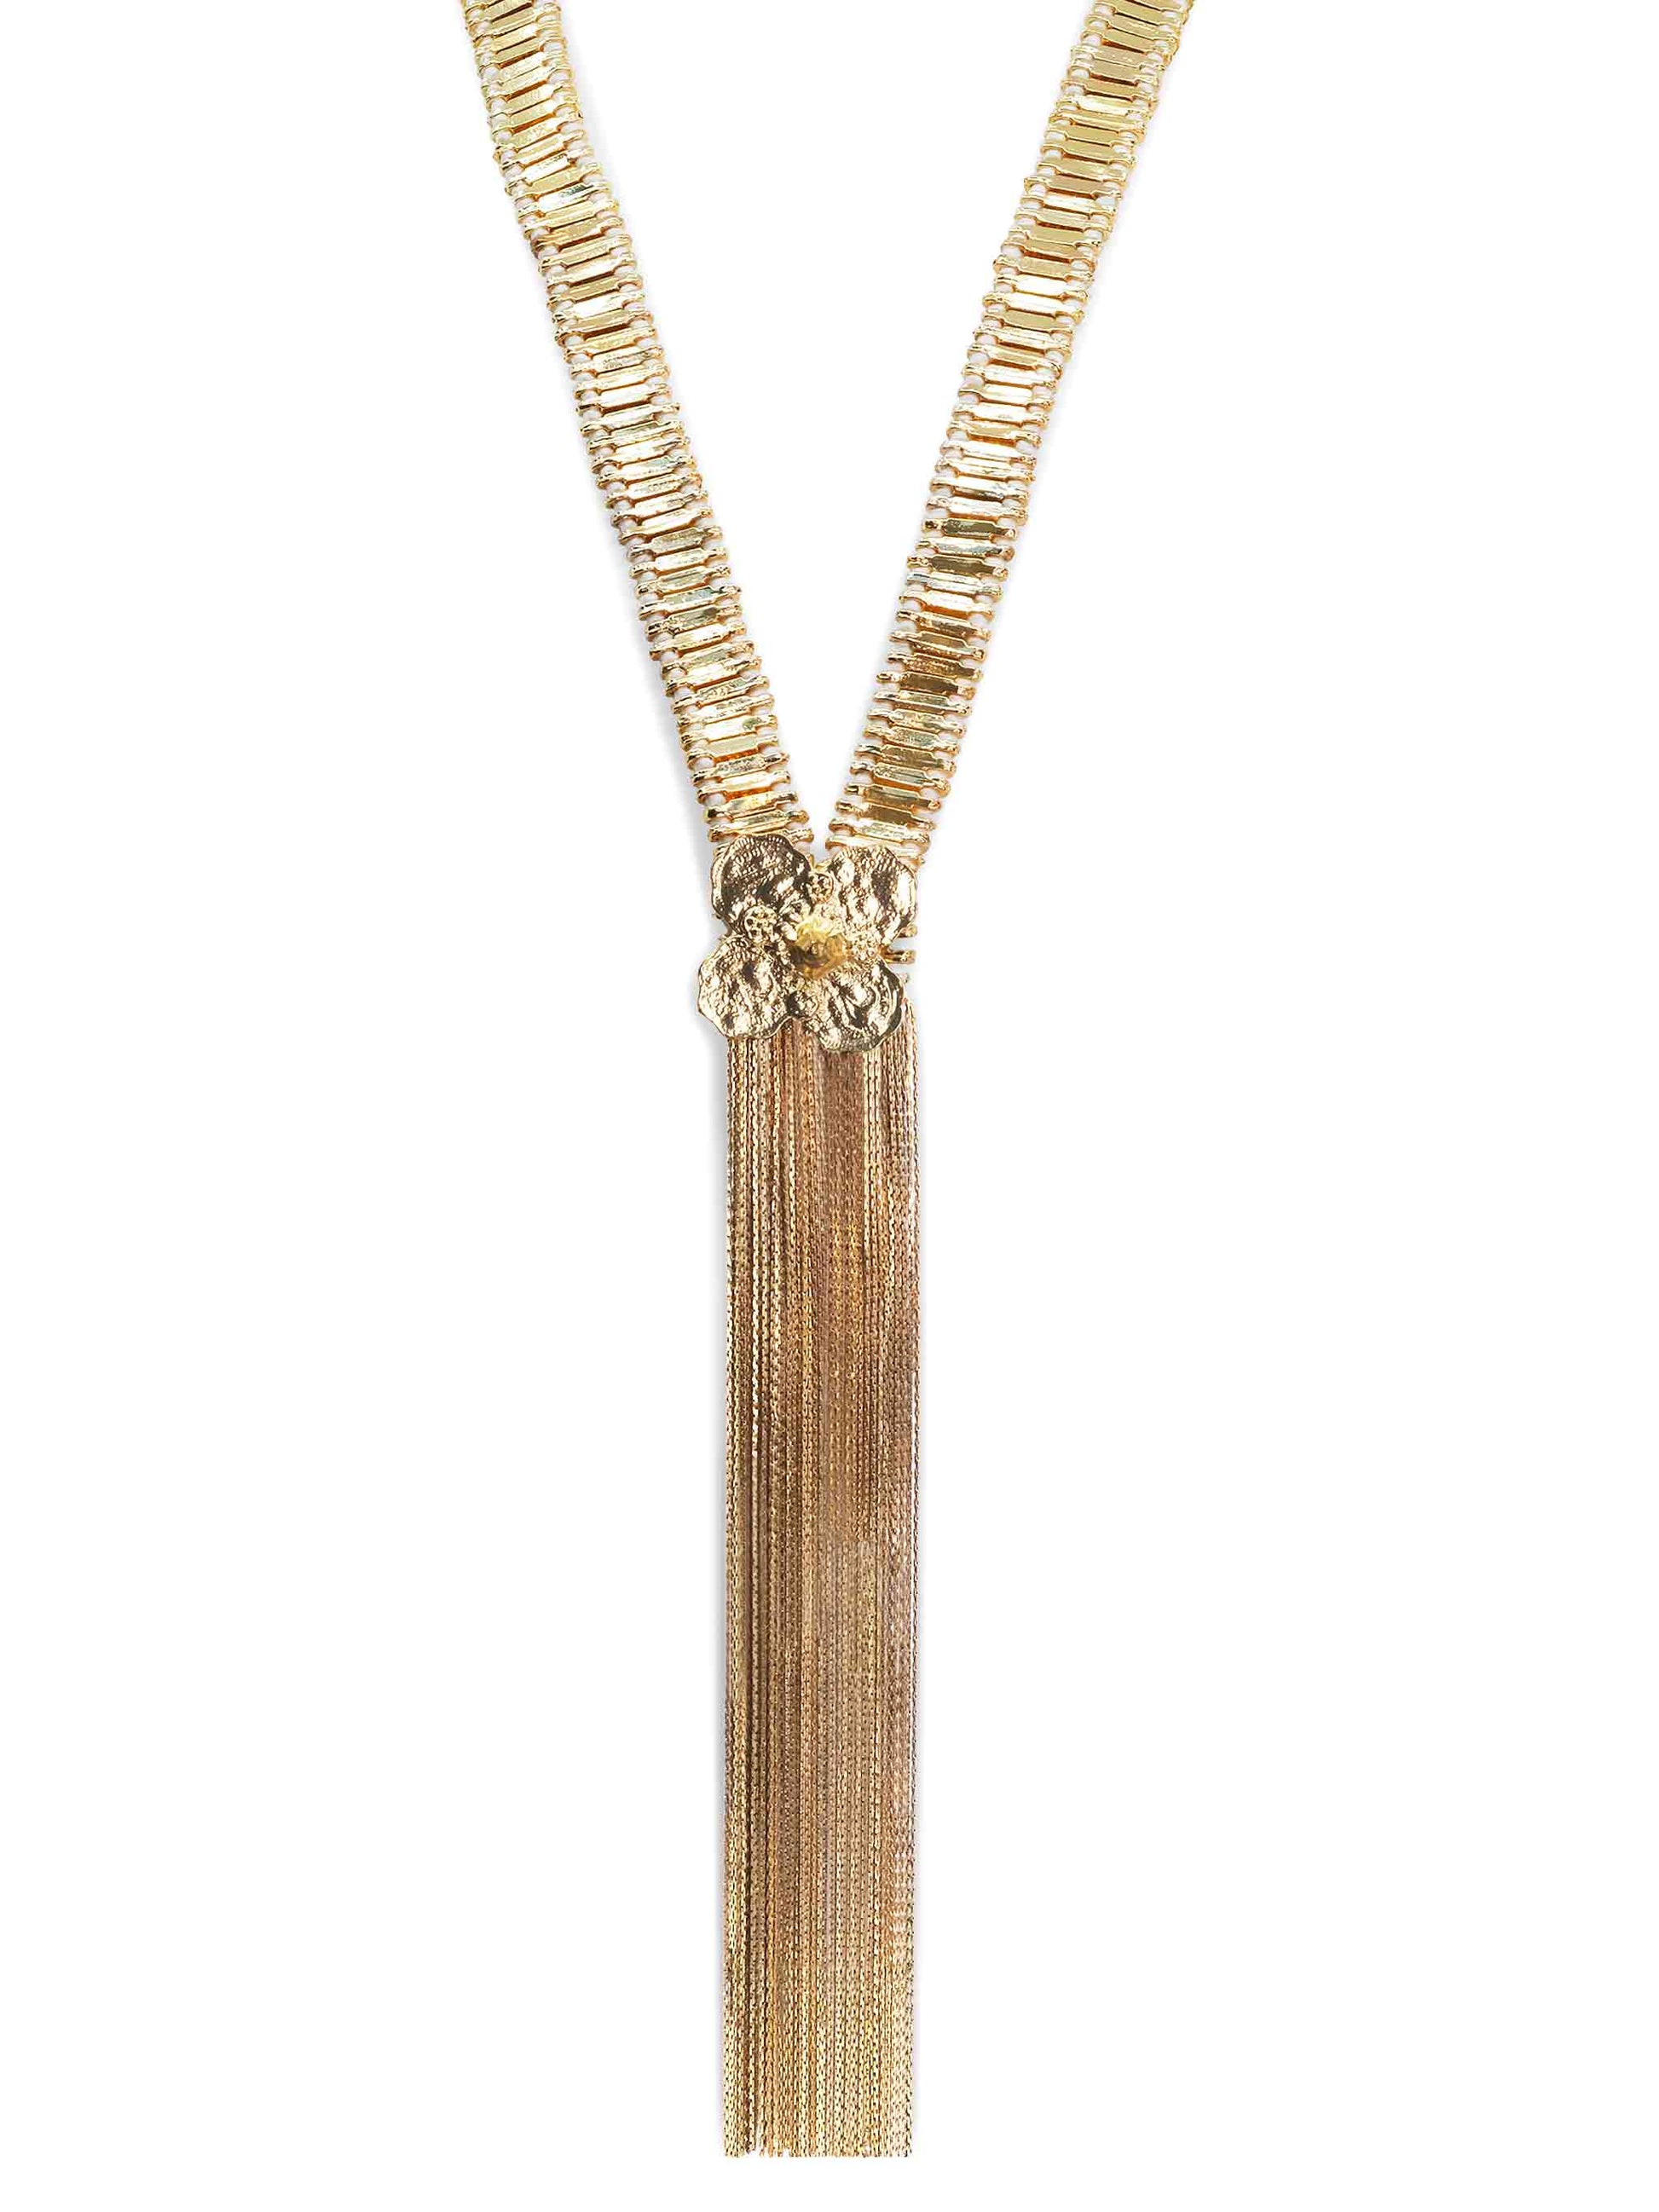 Lucky Goddess Flower Vermeil Chain Fringe Necklace with White Cords